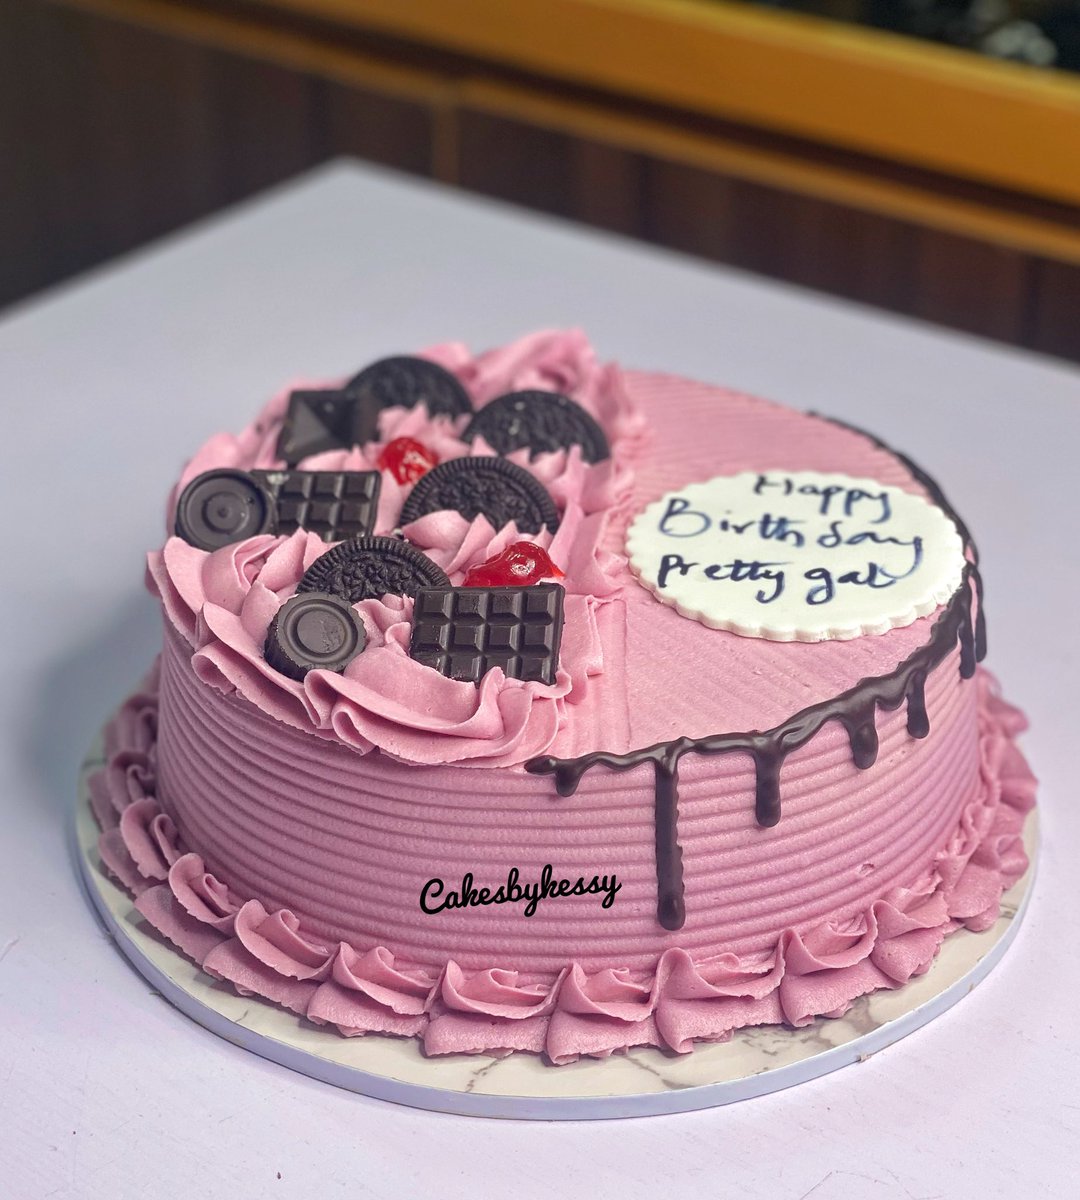 Do you know we have ready to go cakes everyday?

Now you know 
Don’t forget to send us a Dm 
Available for 10,500 only 

Call or WhatsApp 08137774008
#enugutwitter #enugu #baker